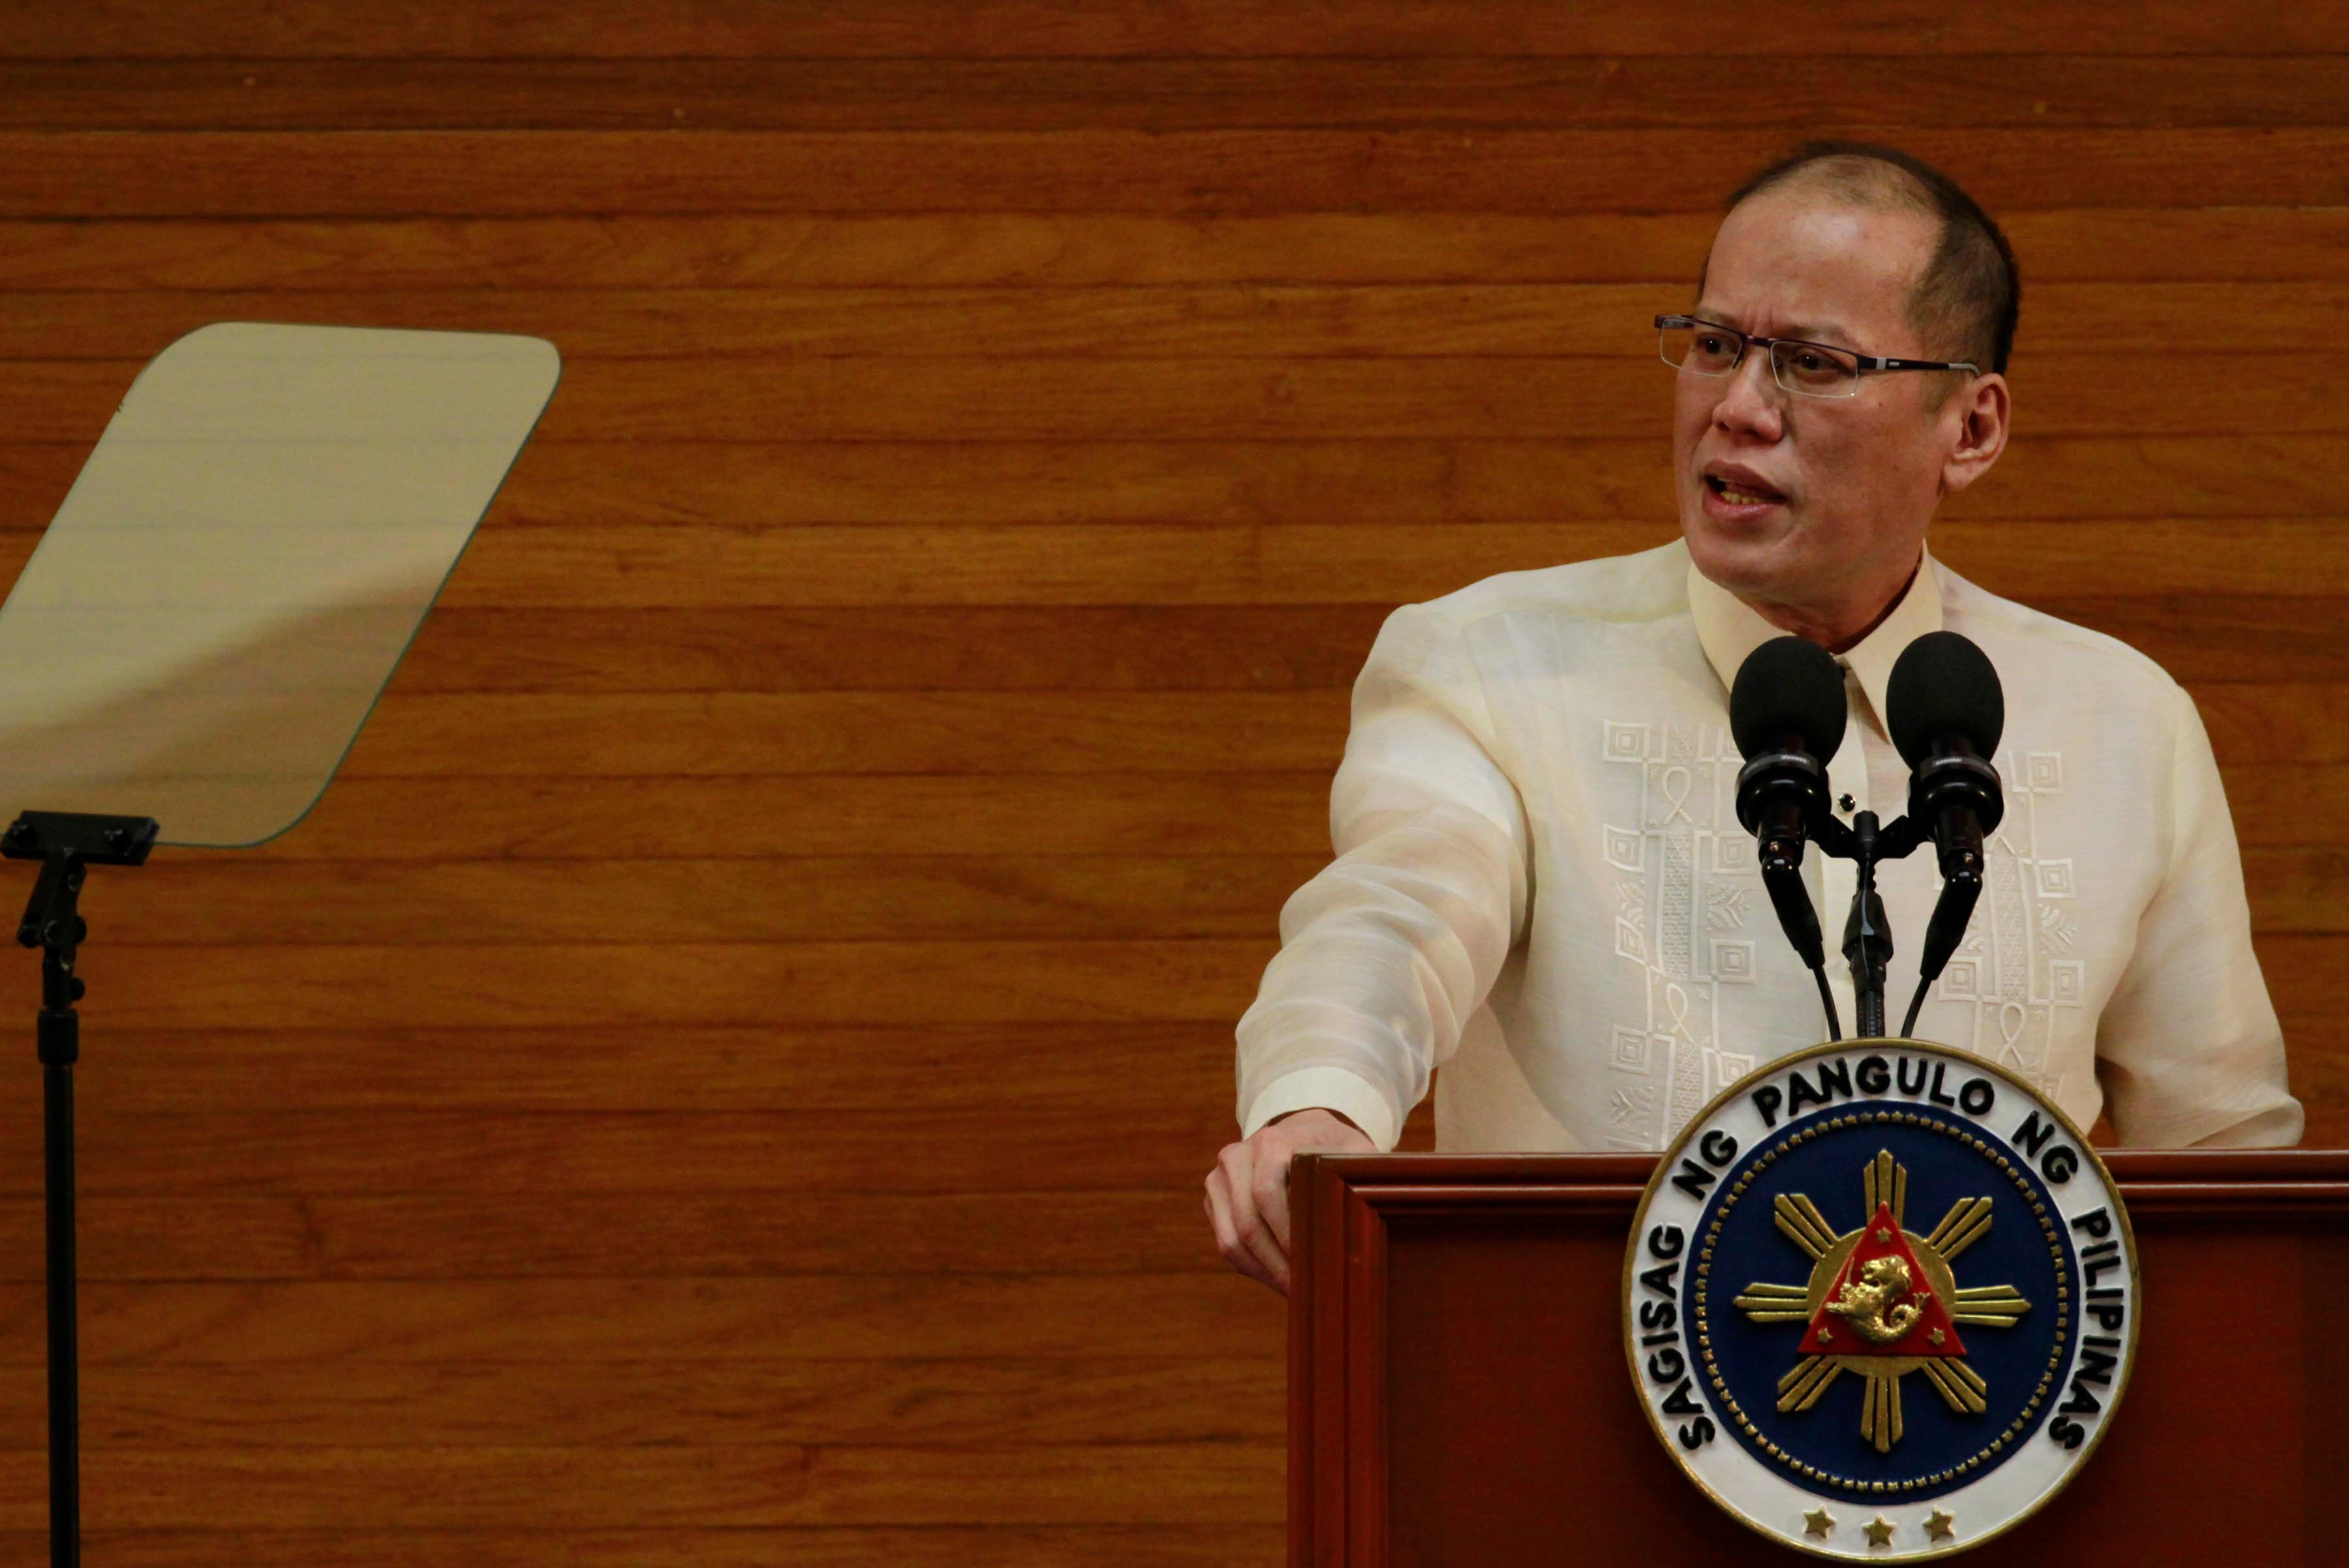 PNOY'S SONA. Former president Benigno S. Aquino III delivers his 6th and last State of the Nation Address (SONA) during the Joint Session of the 16th Congress at the Session Hall of the House of Representatives Complex in Constitution Hills, Quezon City. Photo by Rey Baniquet/Malacañang Photo Bureau  